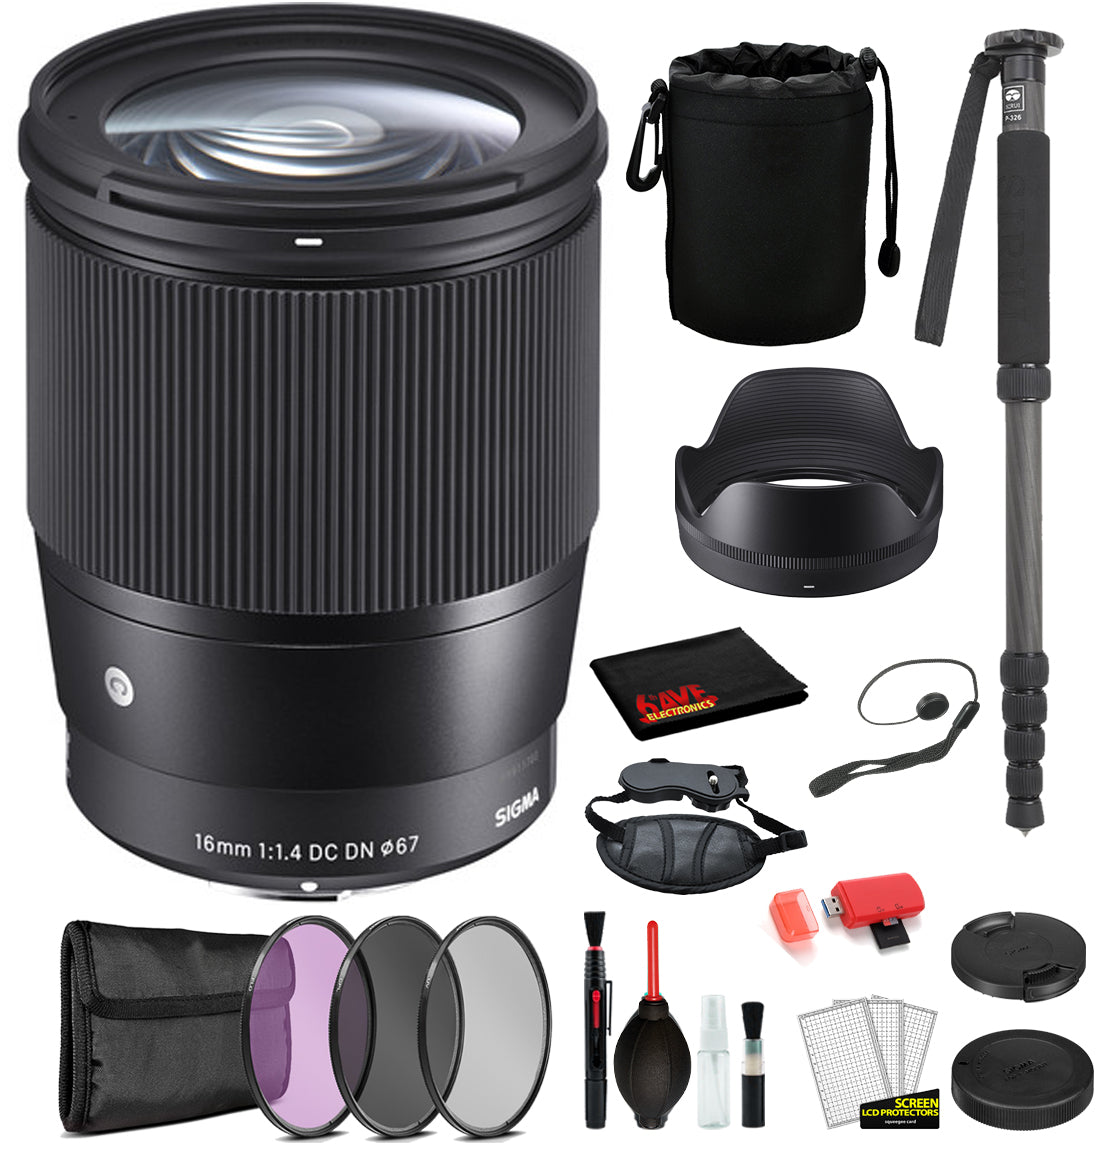 Sigma 16mm f/1.4 DC DN Contemporary Lens for Sony E Mount with: Pro Series Monopod, 3PC Filter Kit + More